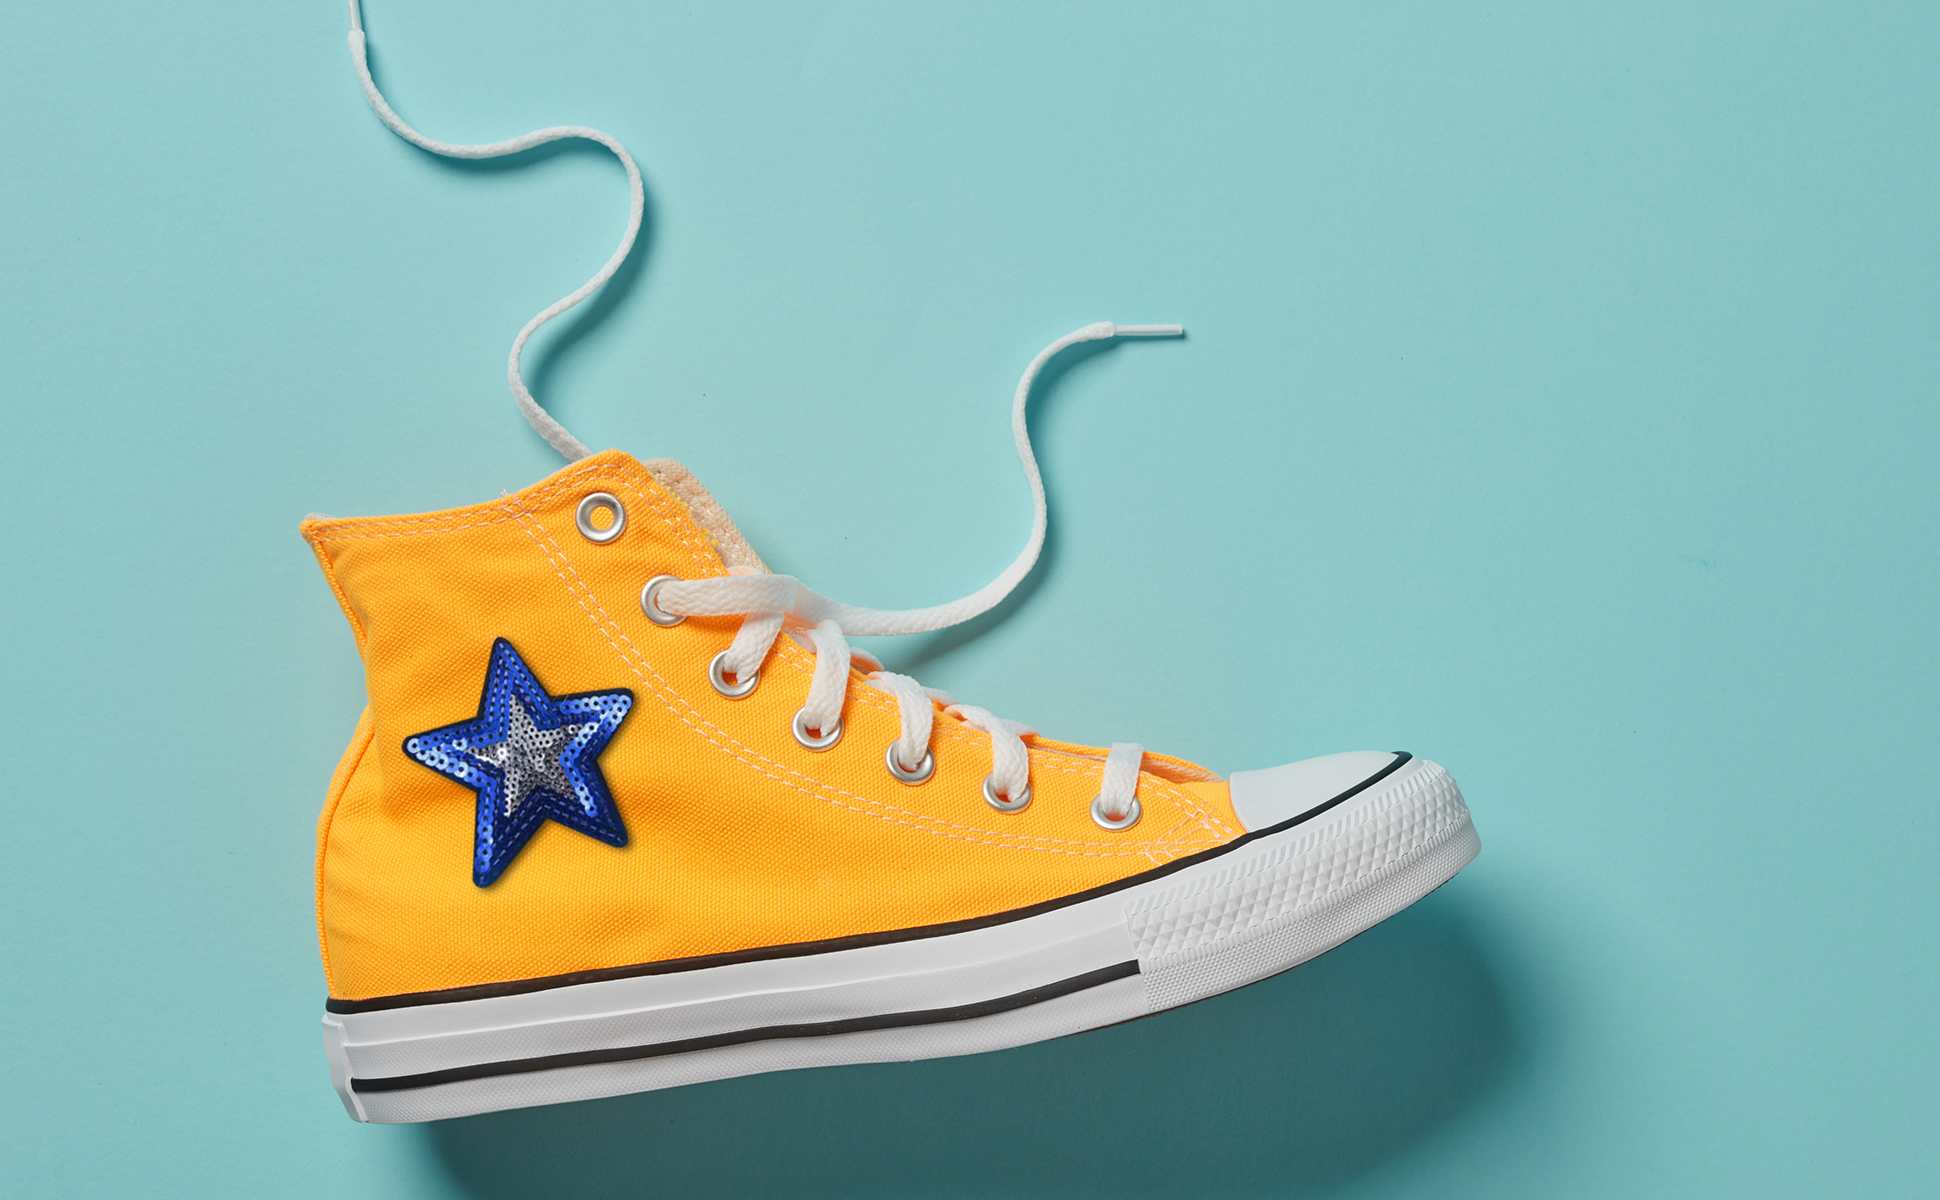 A pair of yellow shoes with sequin patches ,featuring iron-on patch ideas.